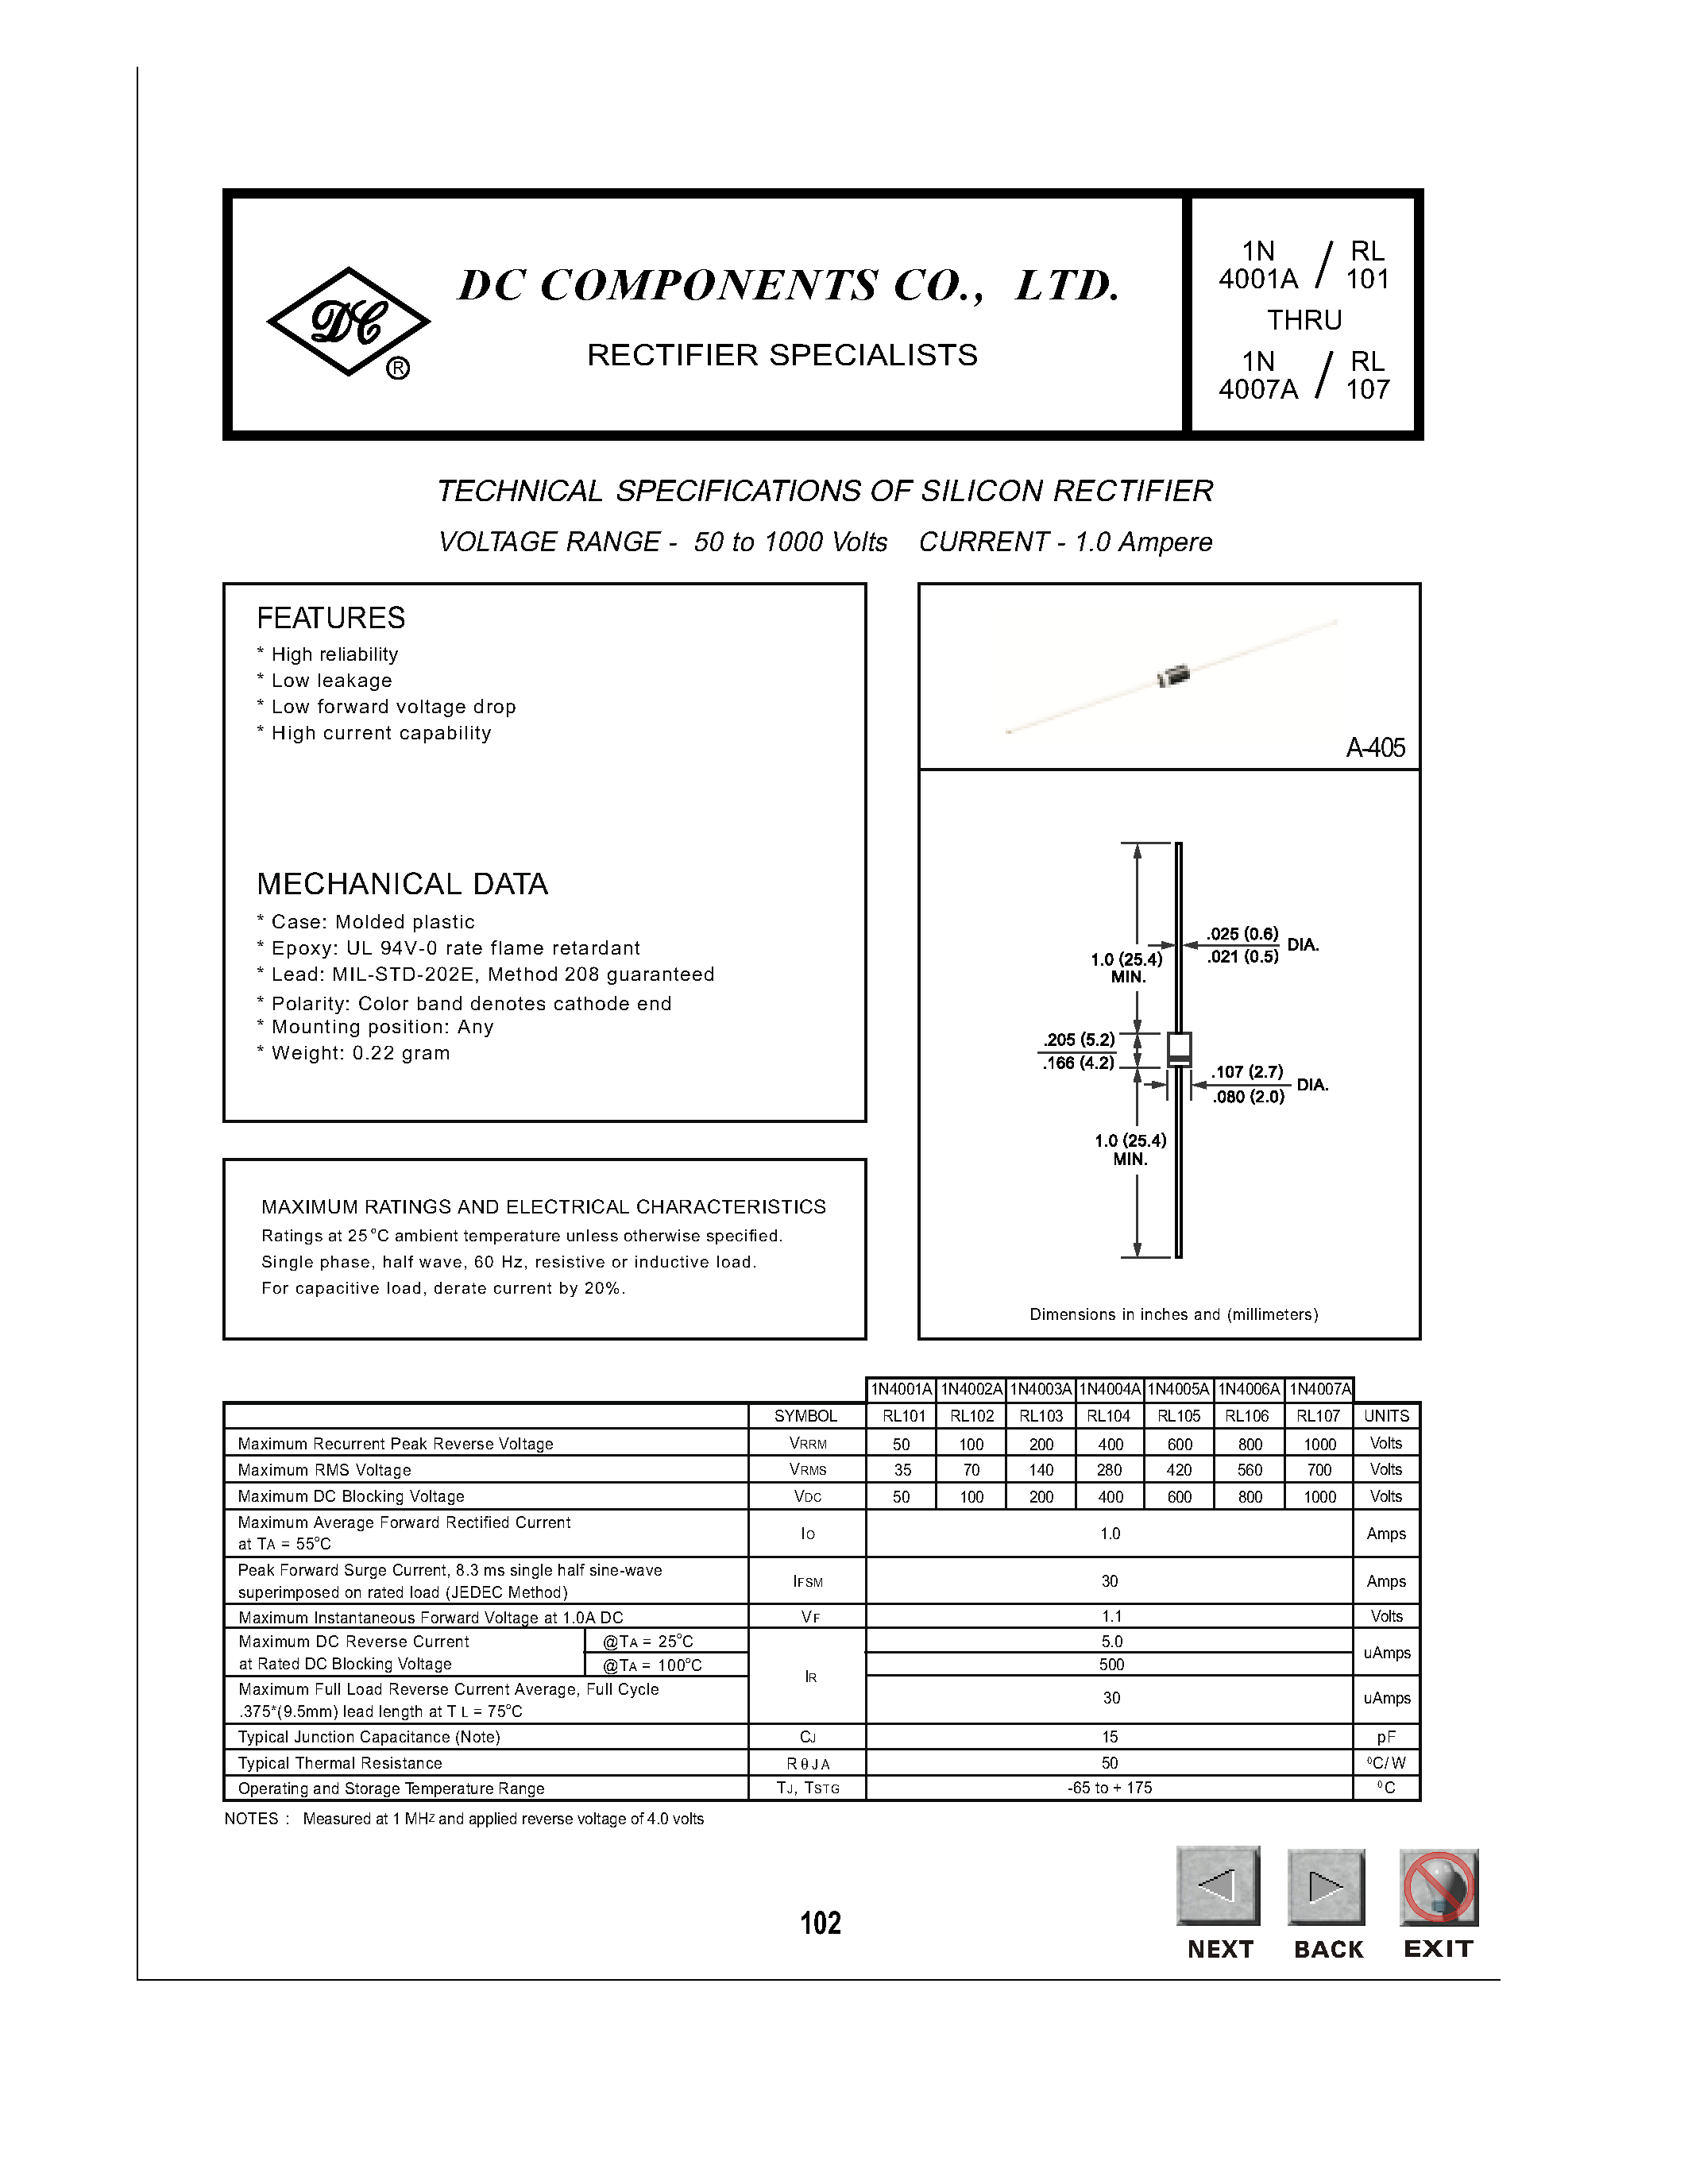 Datasheet 1N4001A - (1N4001A - 1N4007A) TECHNICAL SPECIFICATIONS OF SILICON RECTIFIER page 1